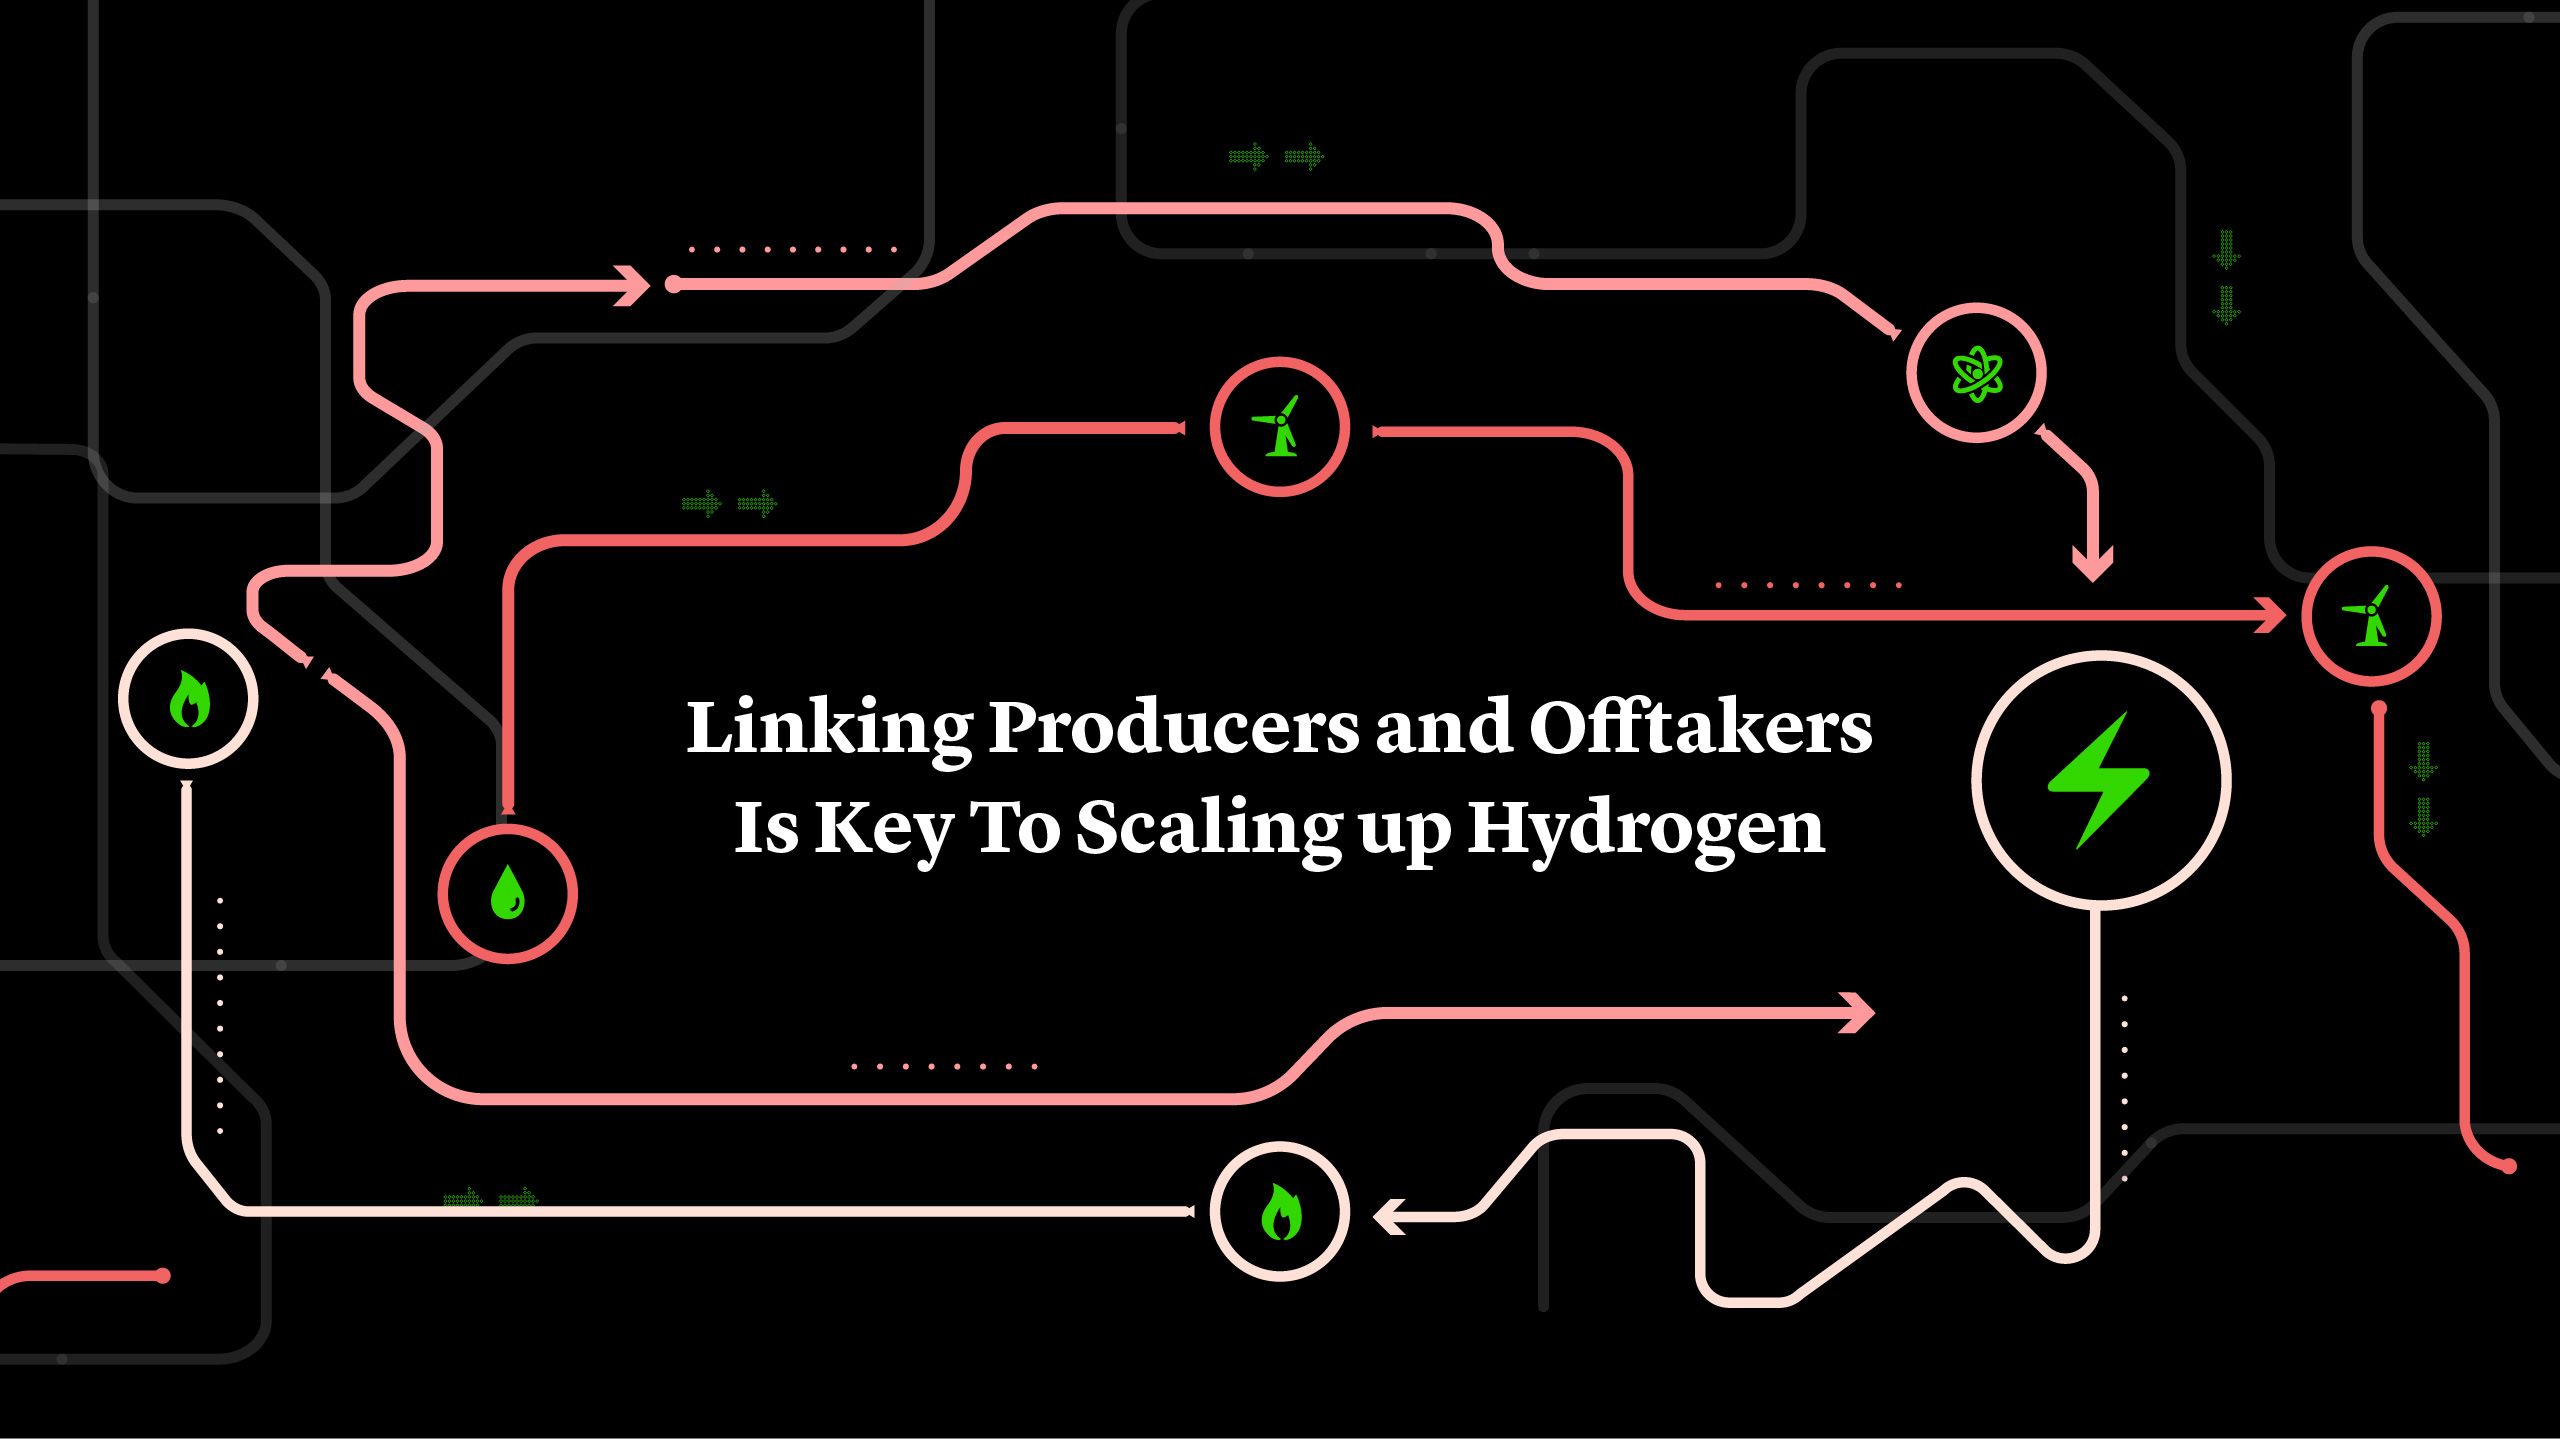 Linking Producers and Offtakers Is Key To Scaling up Hydrogen